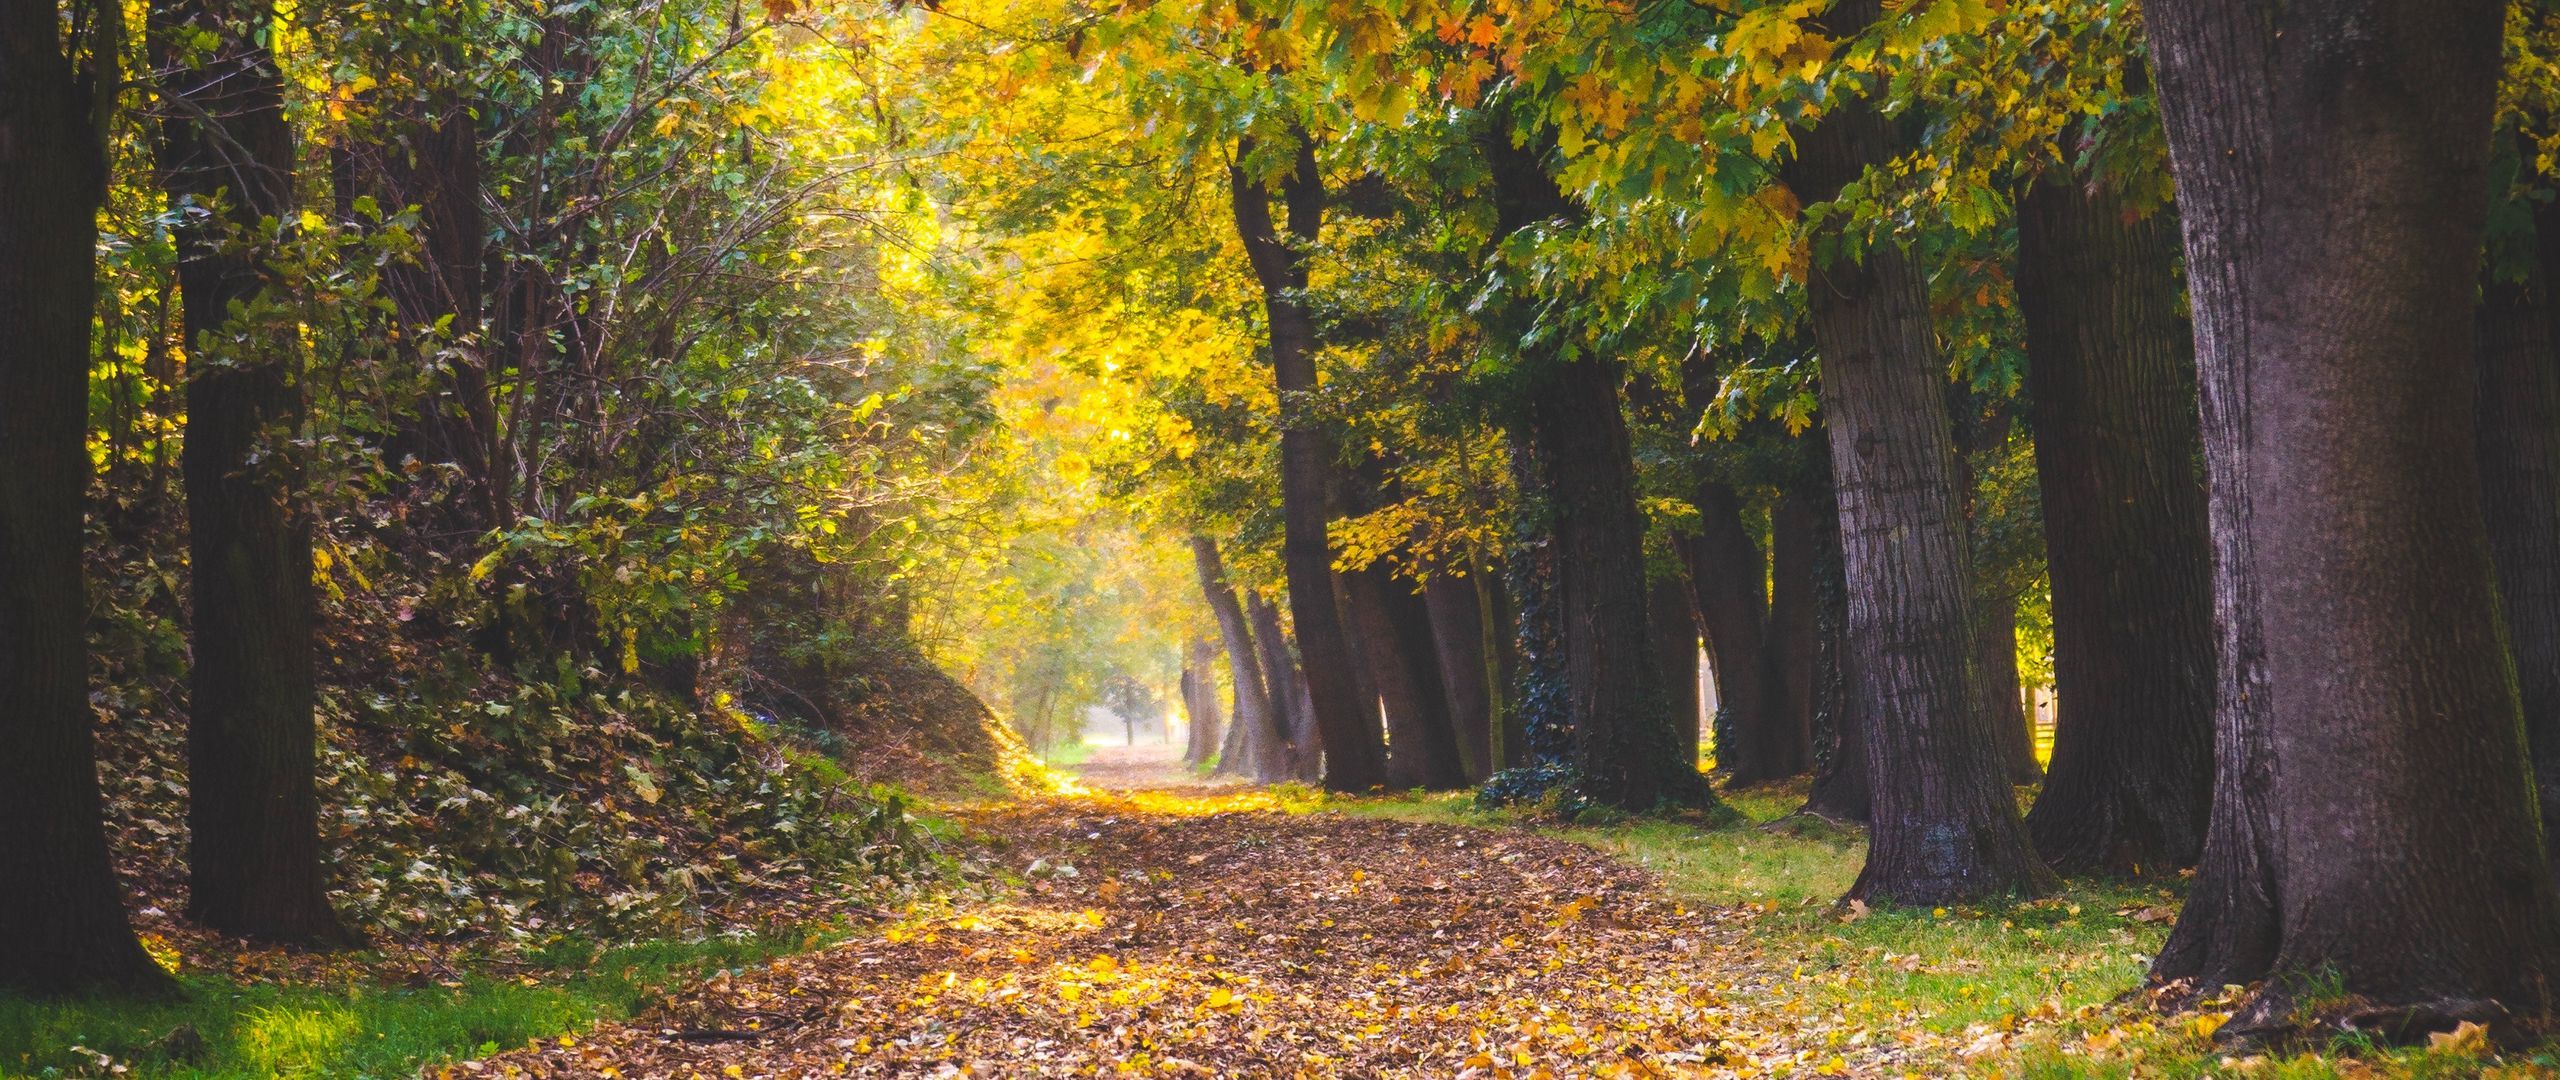 Download wallpaper 2560x1080 park, autumn, foliage, trees, path dual wide 1080p HD background